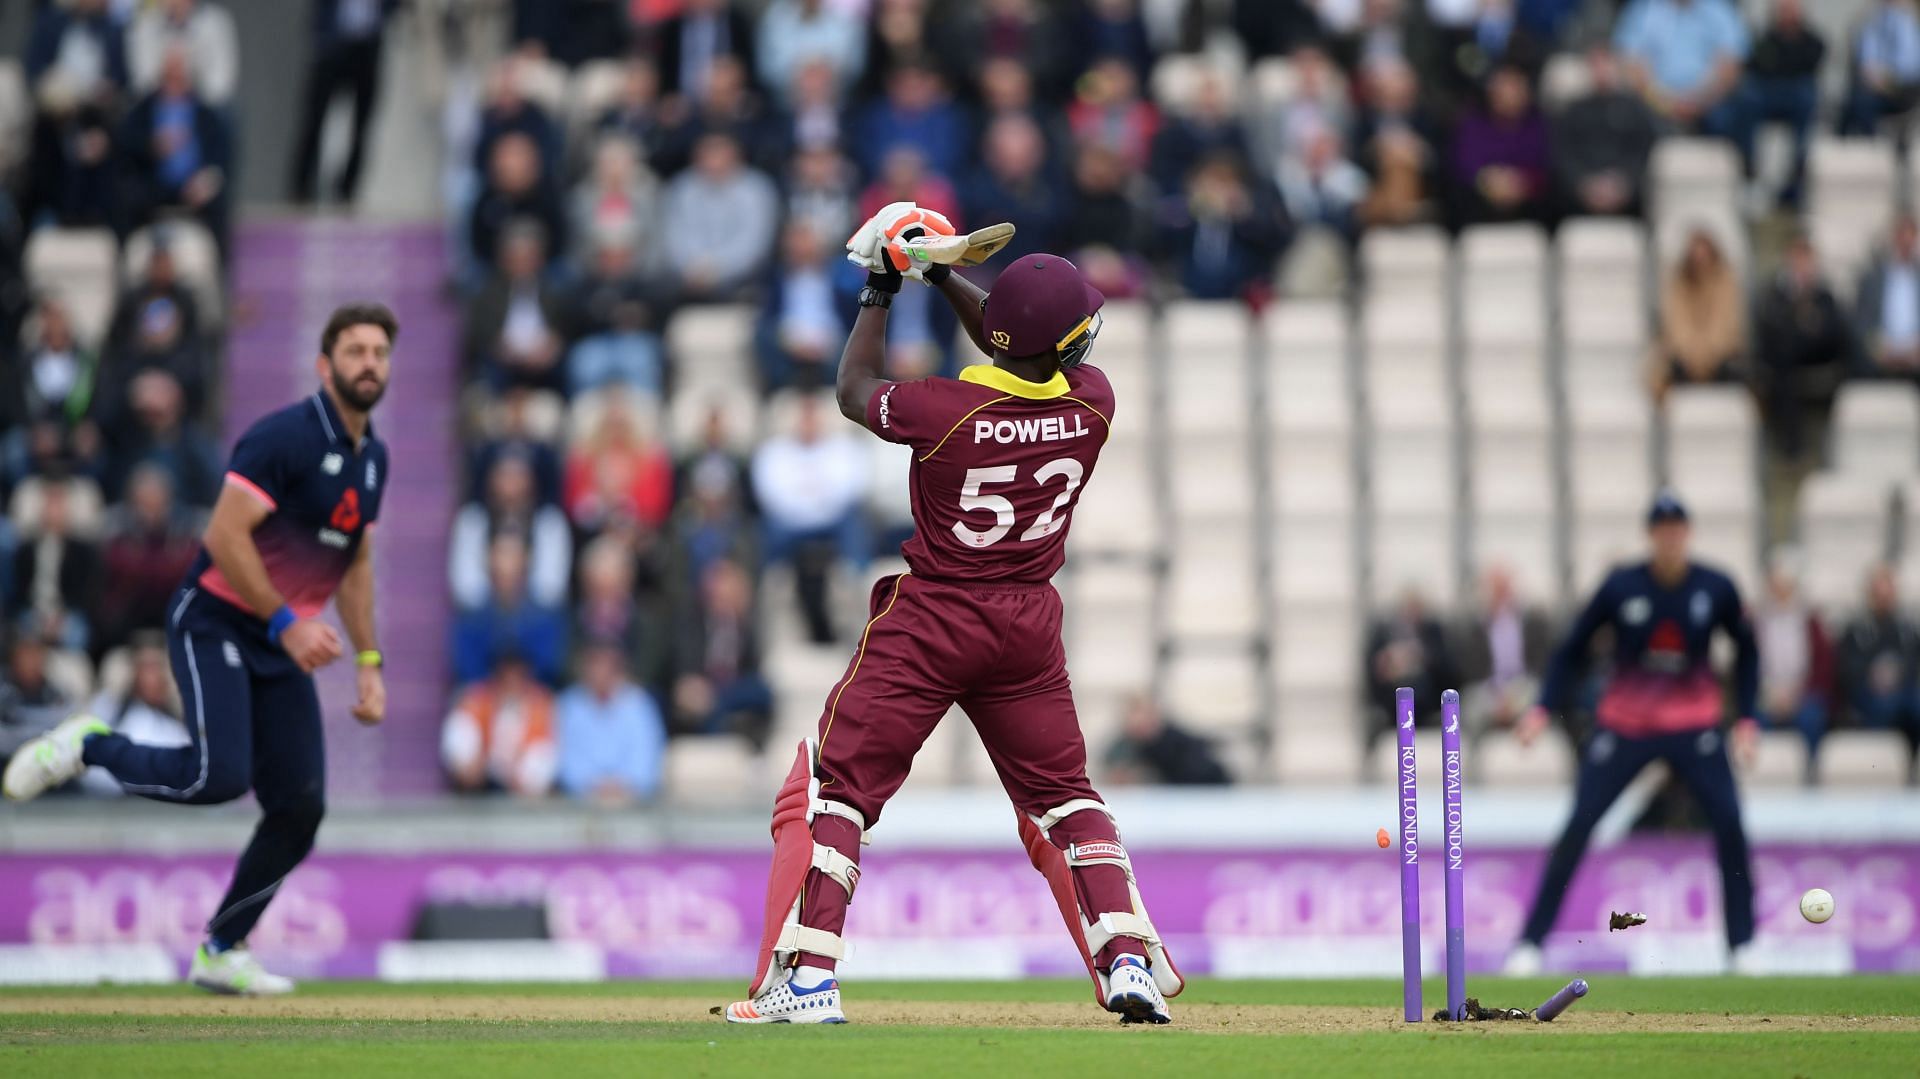 England v West Indies - 5th Royal London One Day International